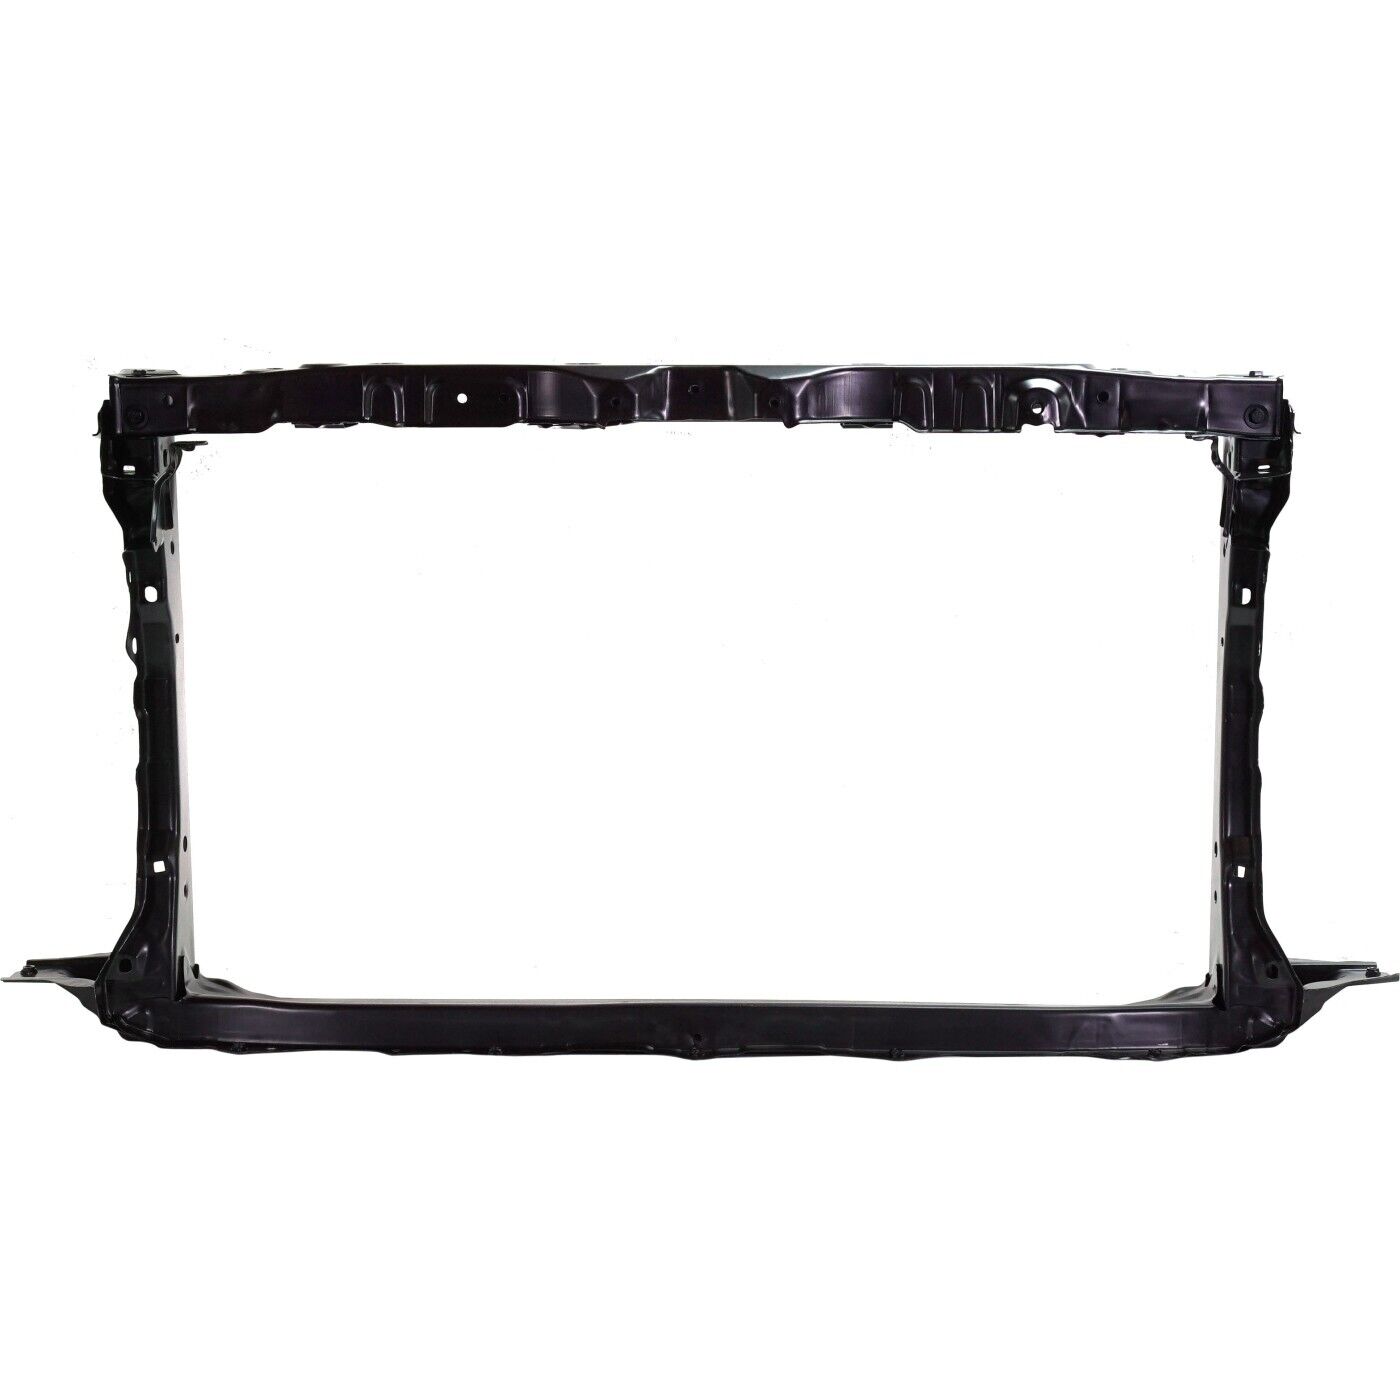 Radiator Support For 2012 2013 2014 2015 Toyota Prius C Assembly